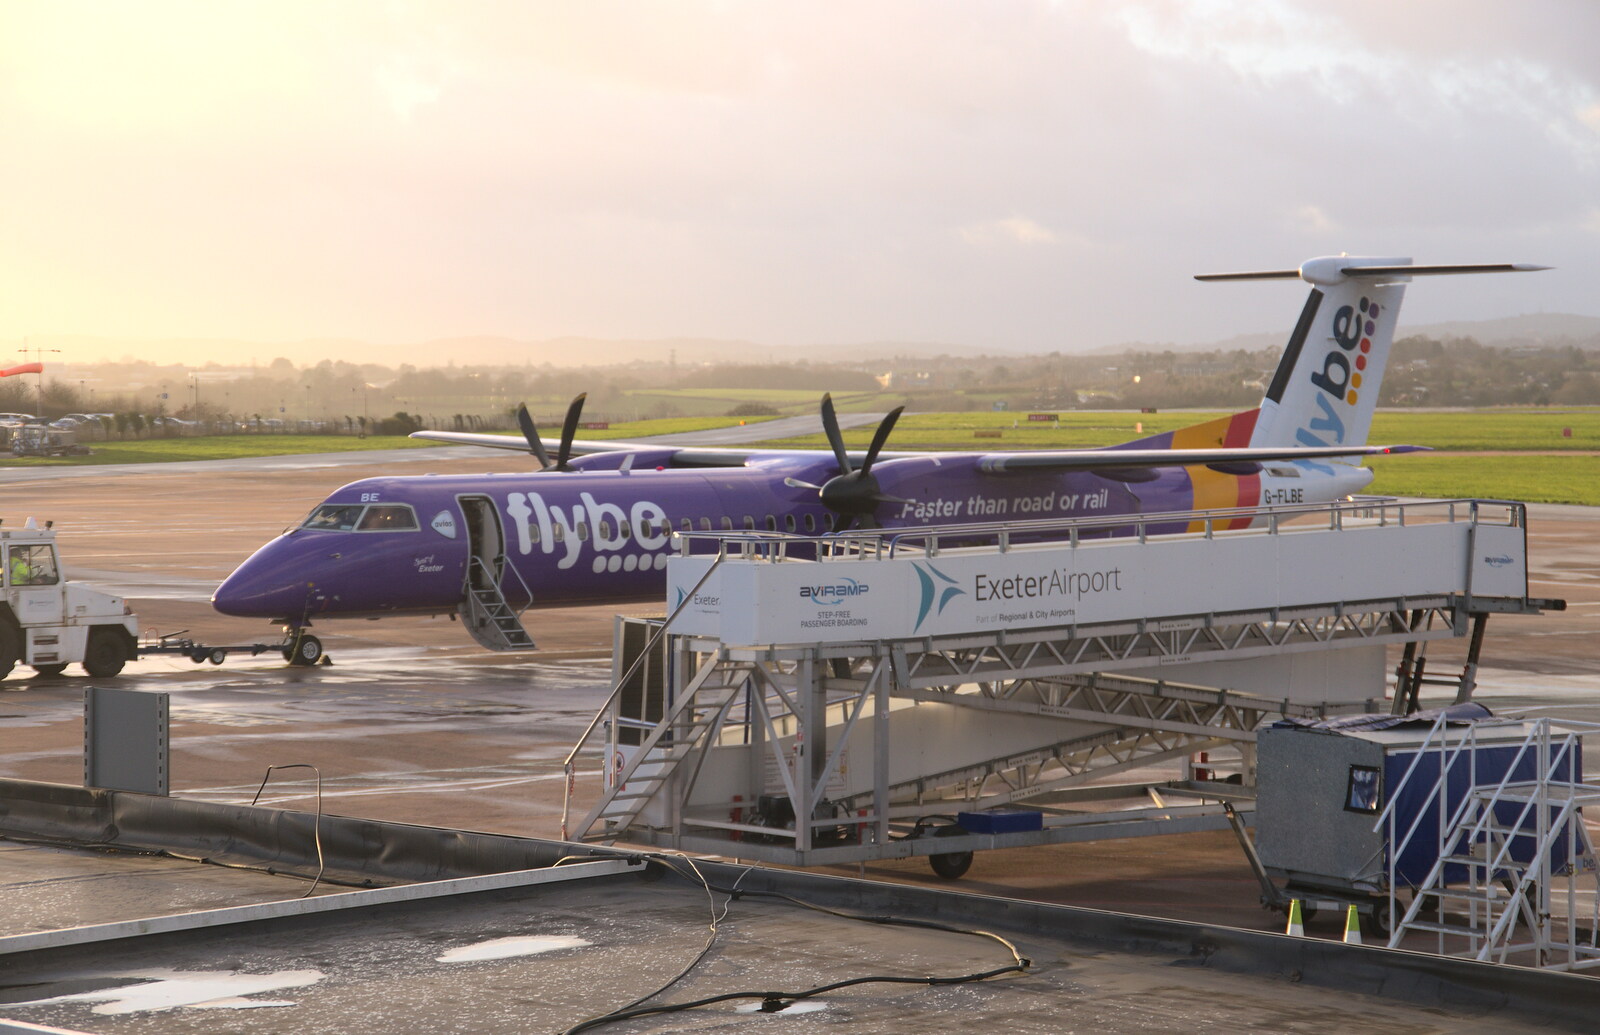 There's a FlyBe Dash-8 at Exeter from New Year's Eve in Spreyton, Devon - 31st December 2017